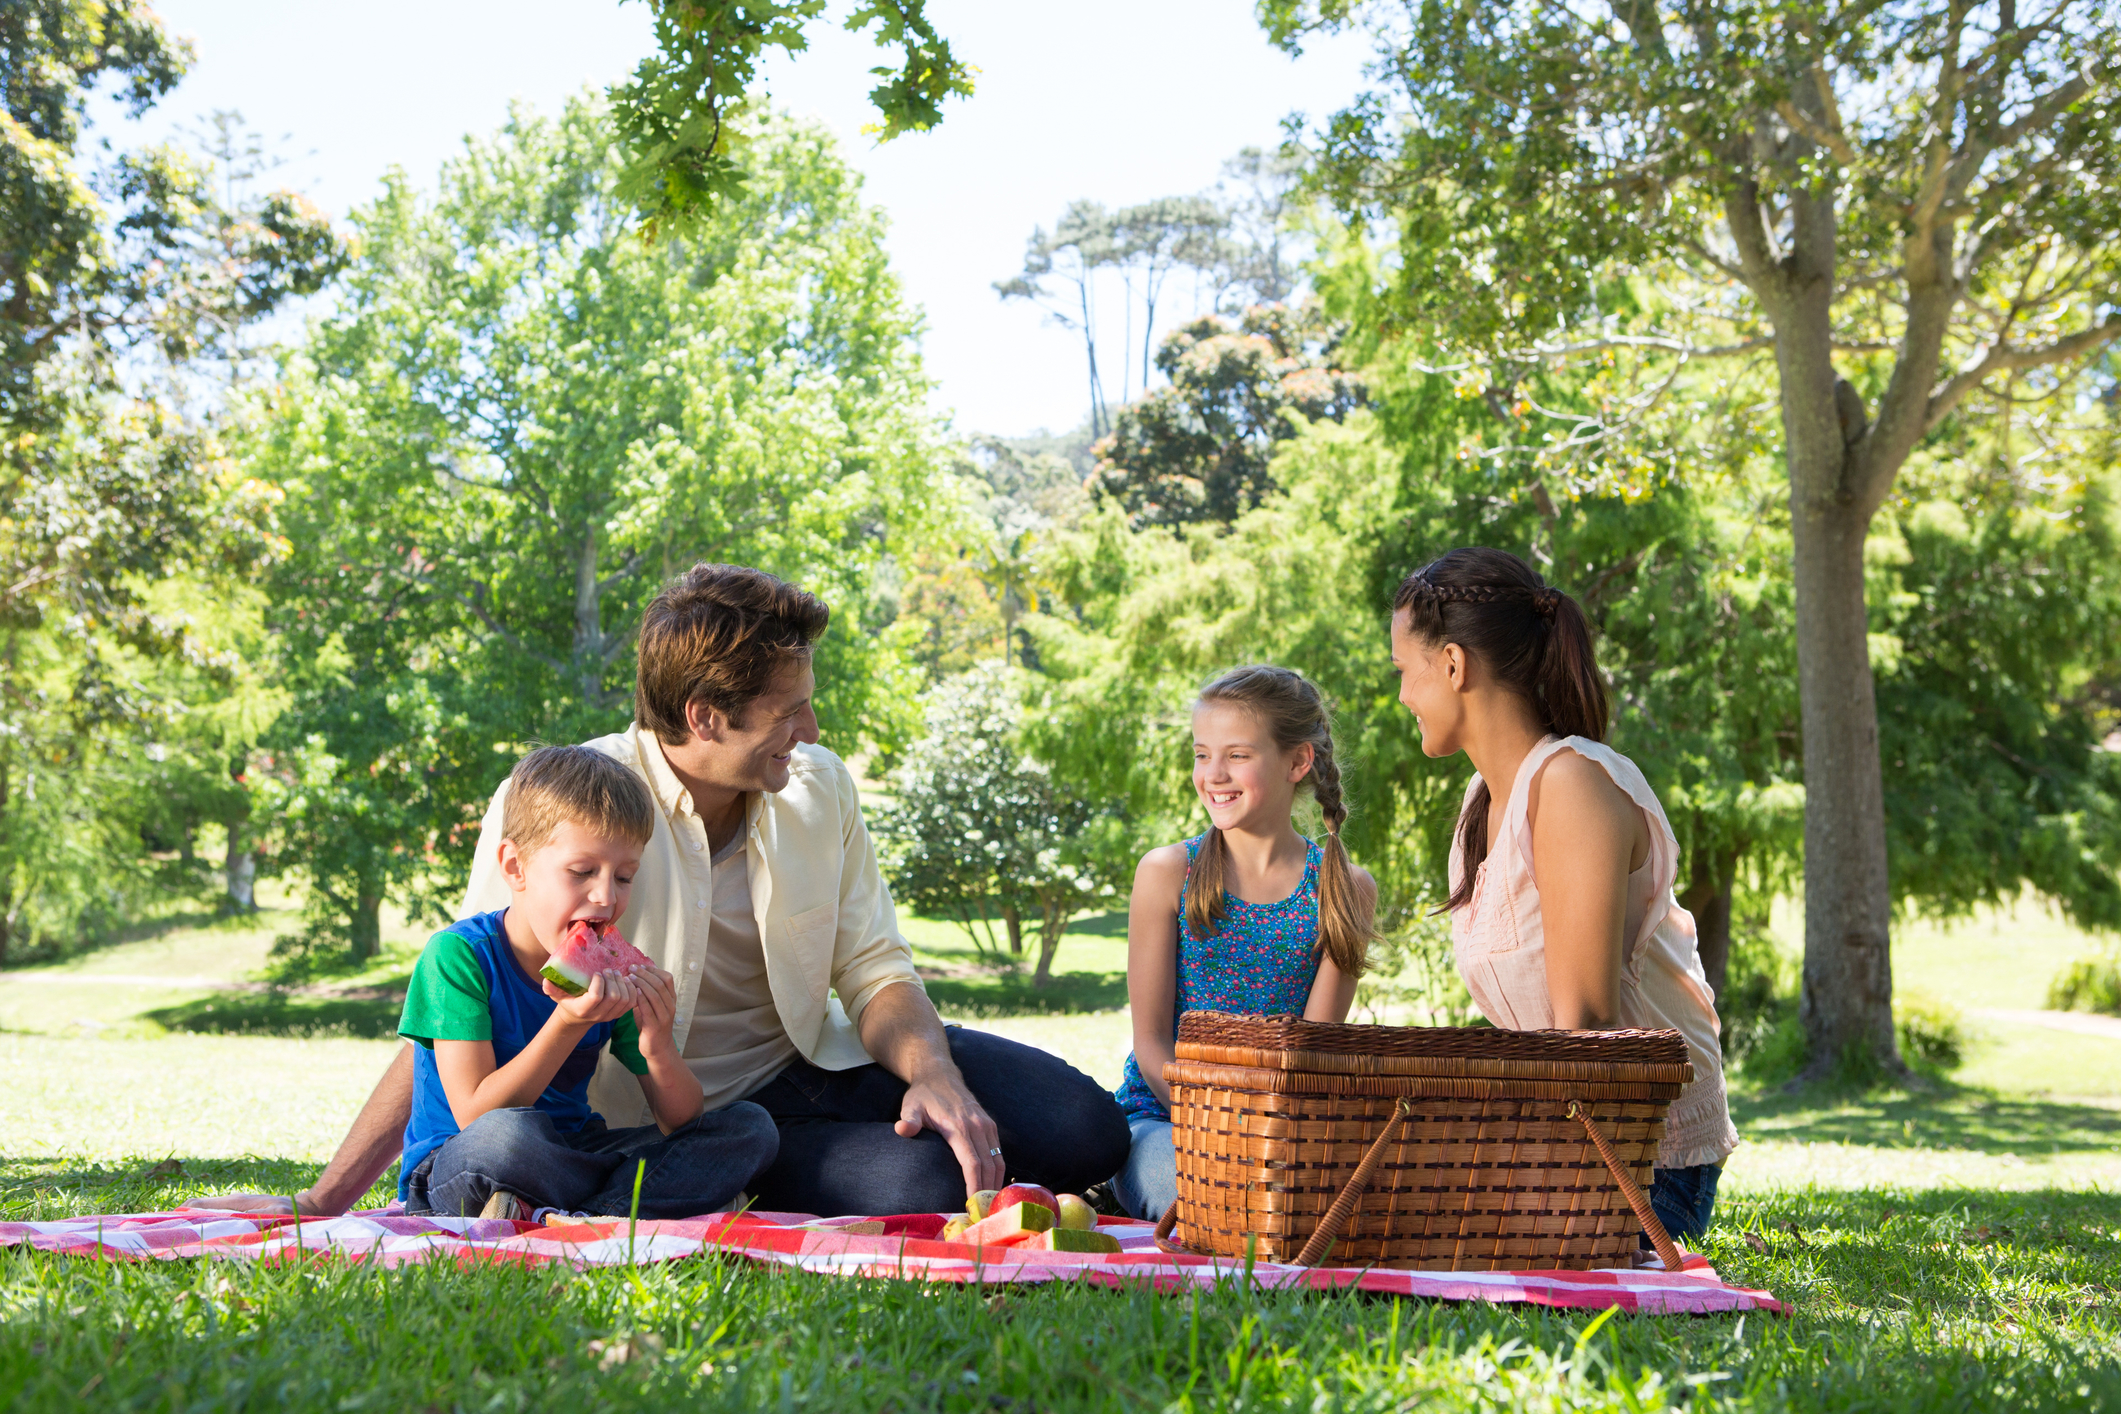 10 tips for a frugal picnic